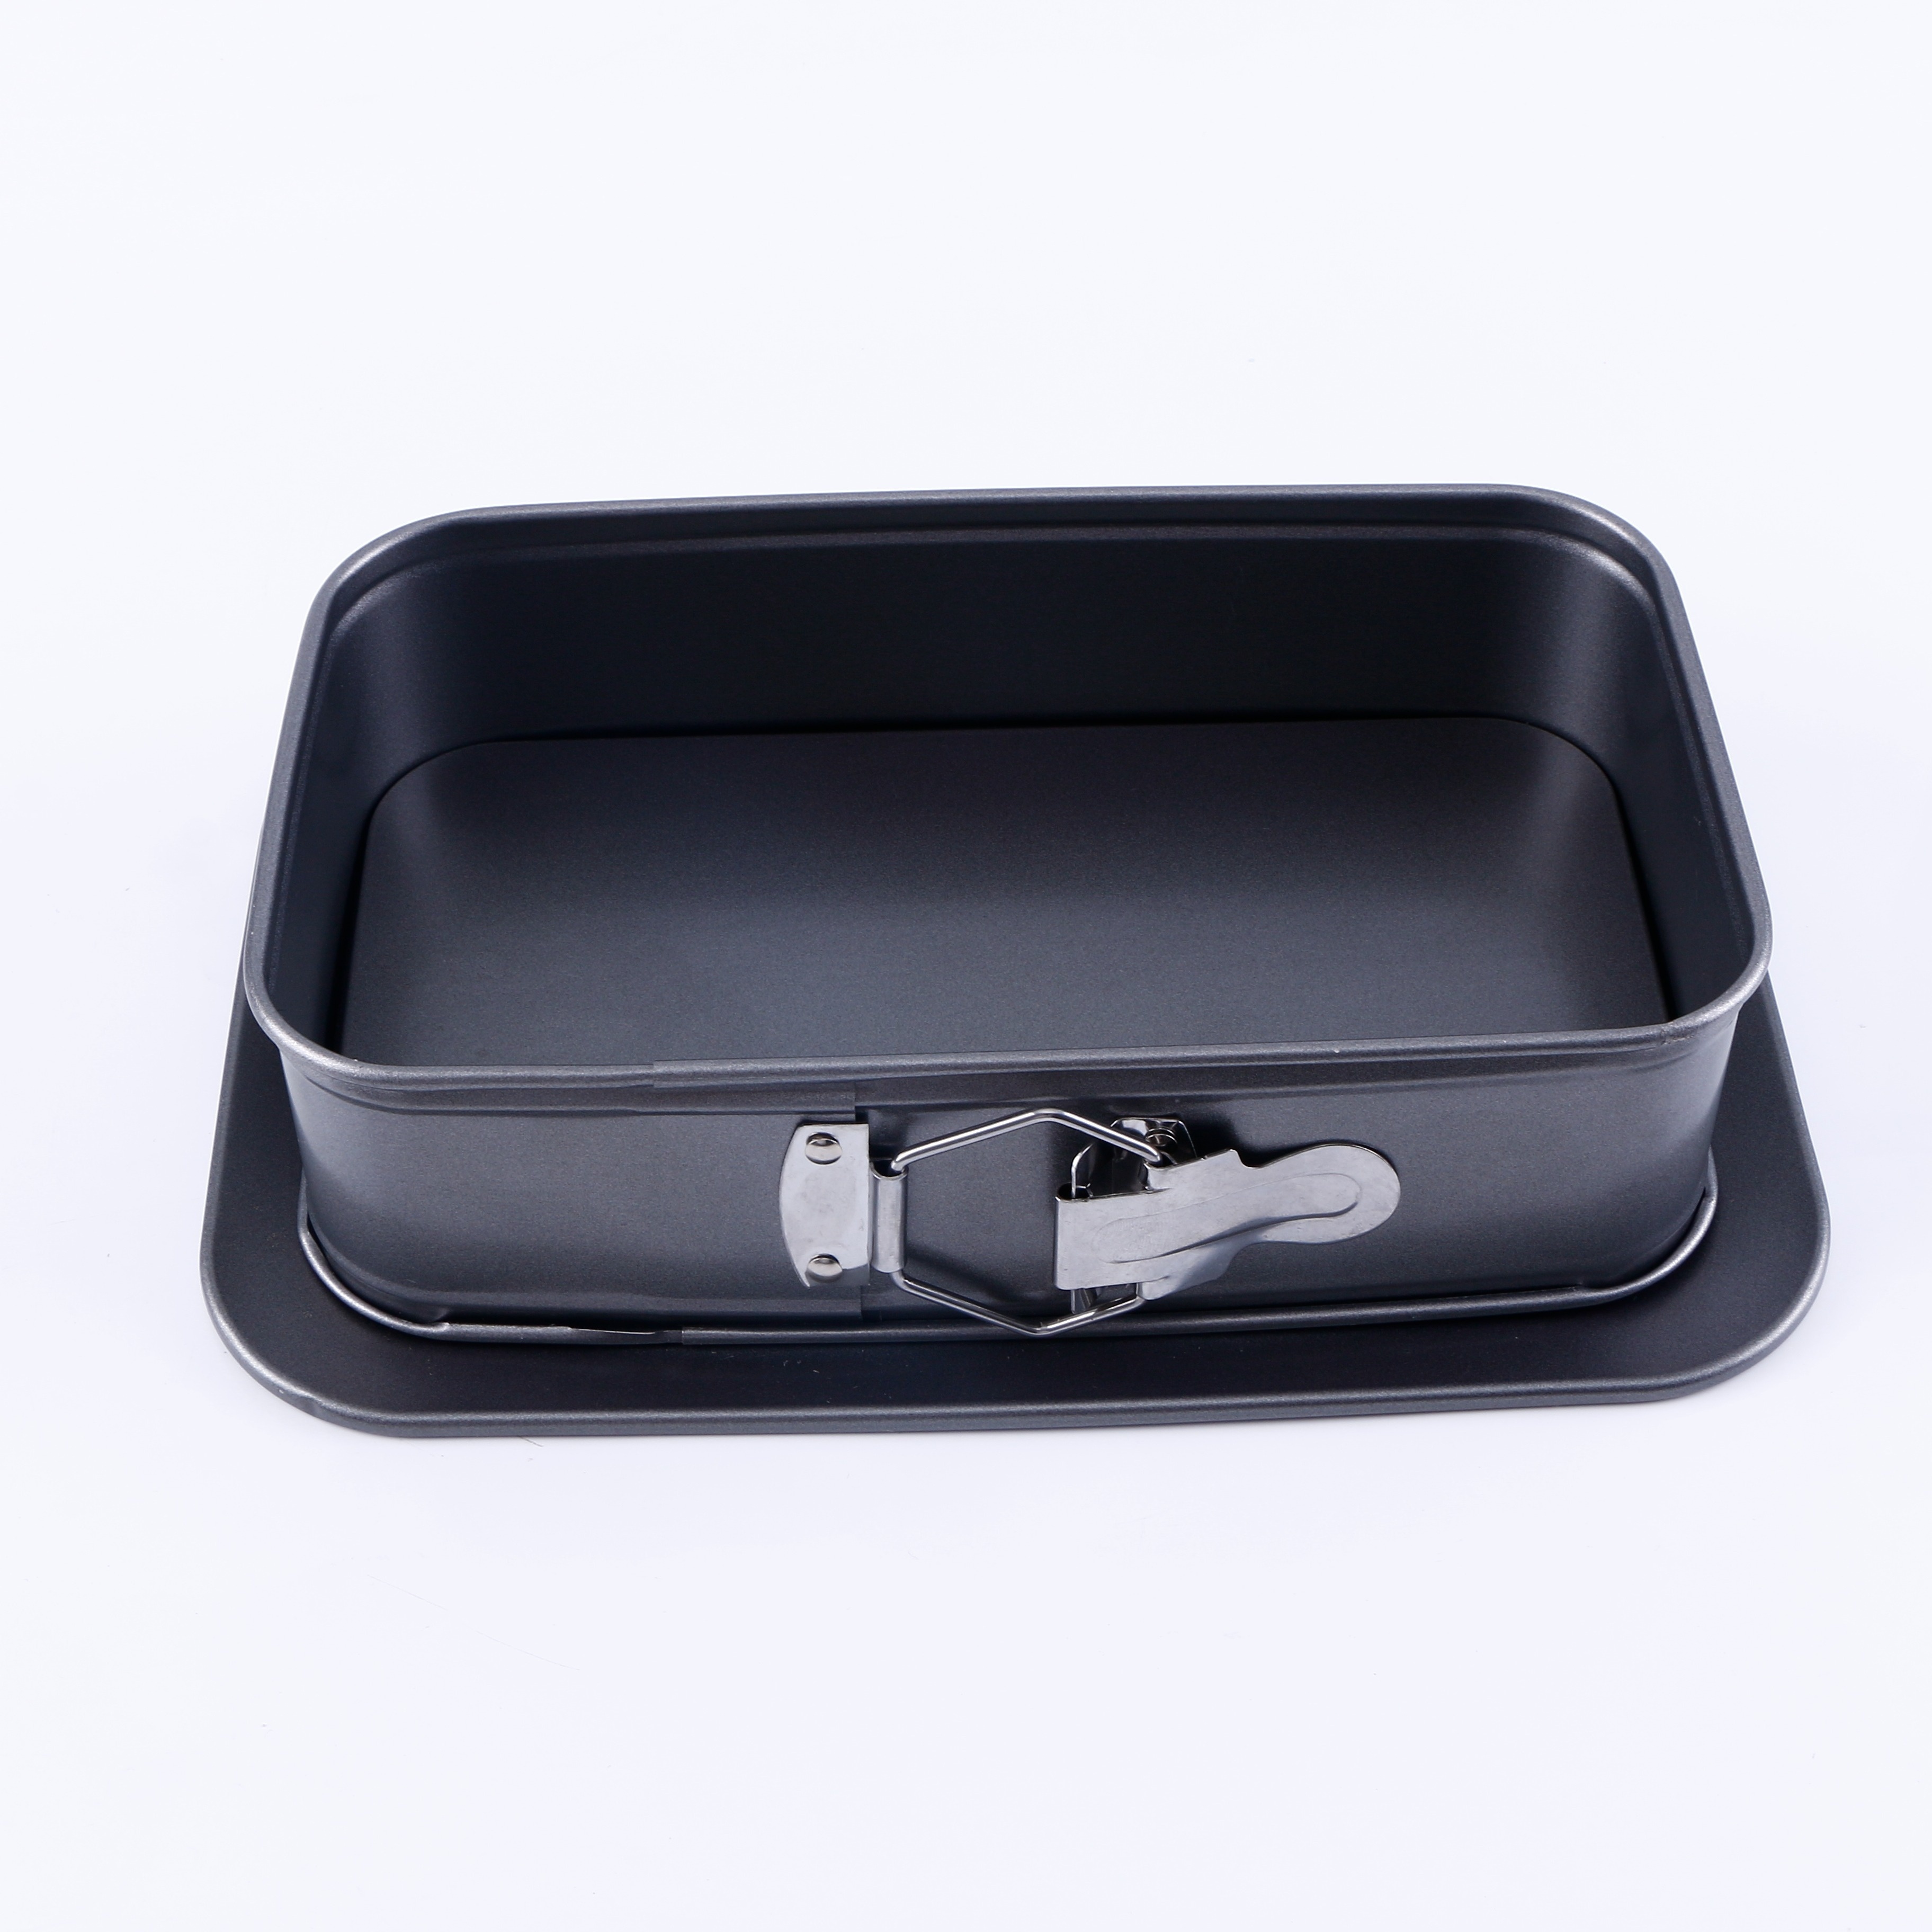 

1pc Carbon Steel Rectangle Cake Pan 9.45''x5.5'' Non-stick Removable Bottom Springform Cake Mould Cake Molds Baking Accessories Bakeware